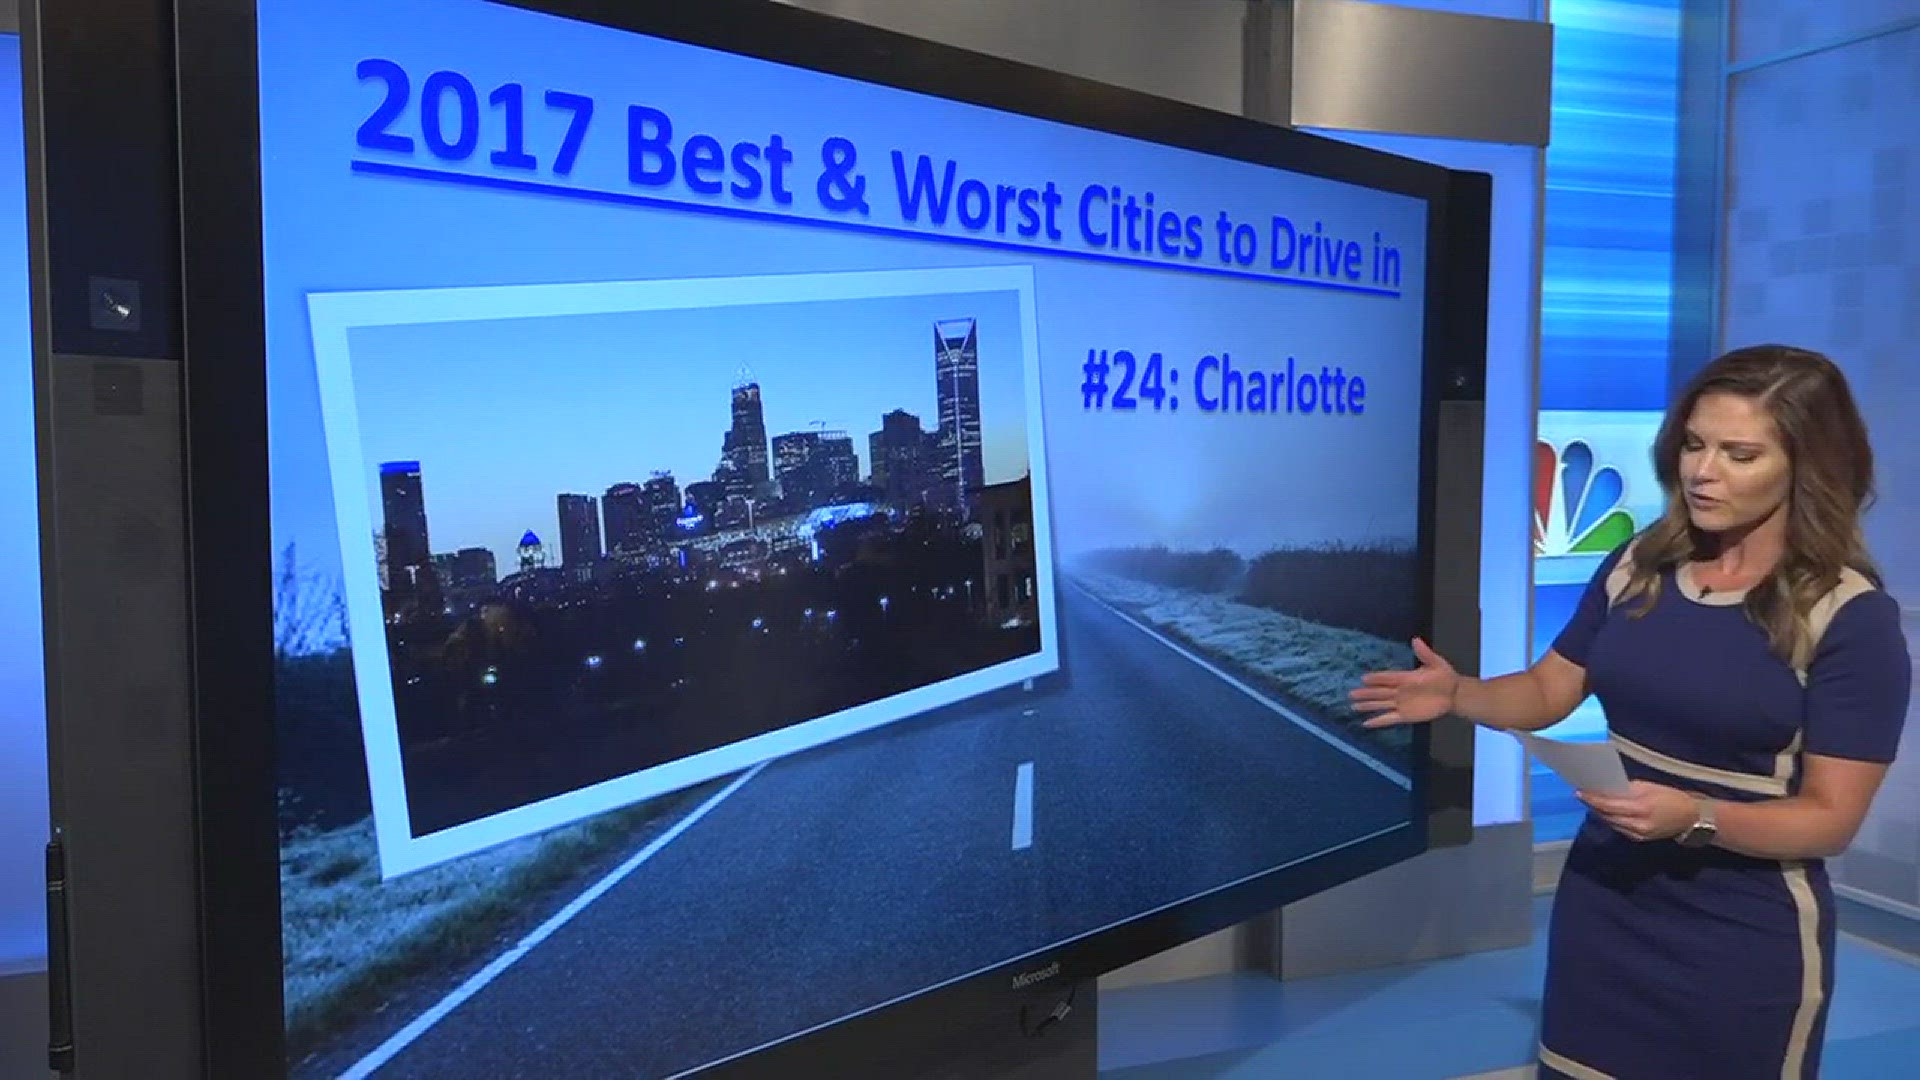 A new study of the 100 biggest cities comparing gas prices, parking spaces, and vehicle maintenance listed Charlotte in the top 25.